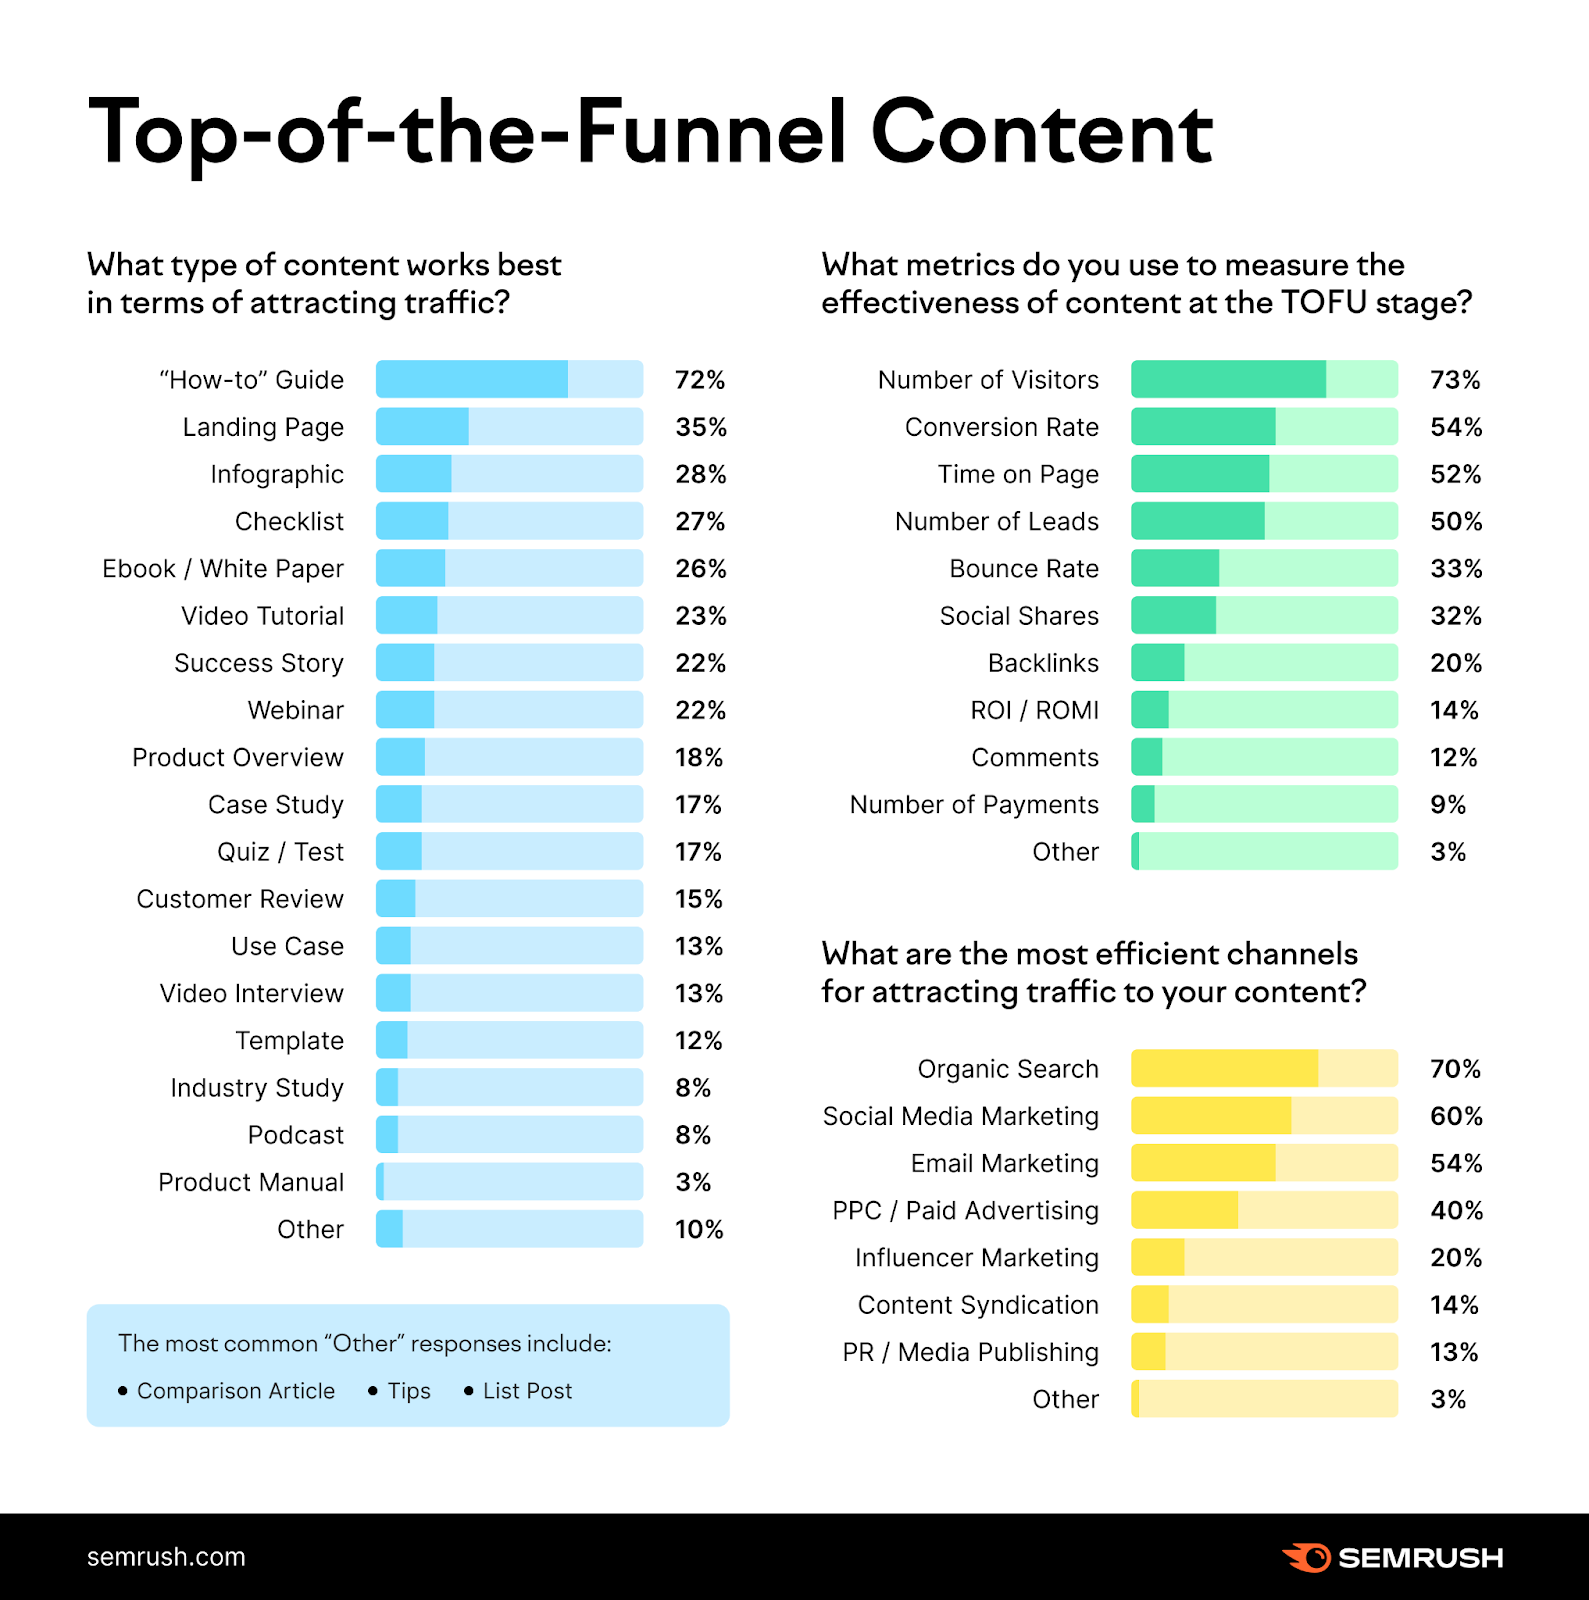 A list of the best ToFu content, based on Semrush survey